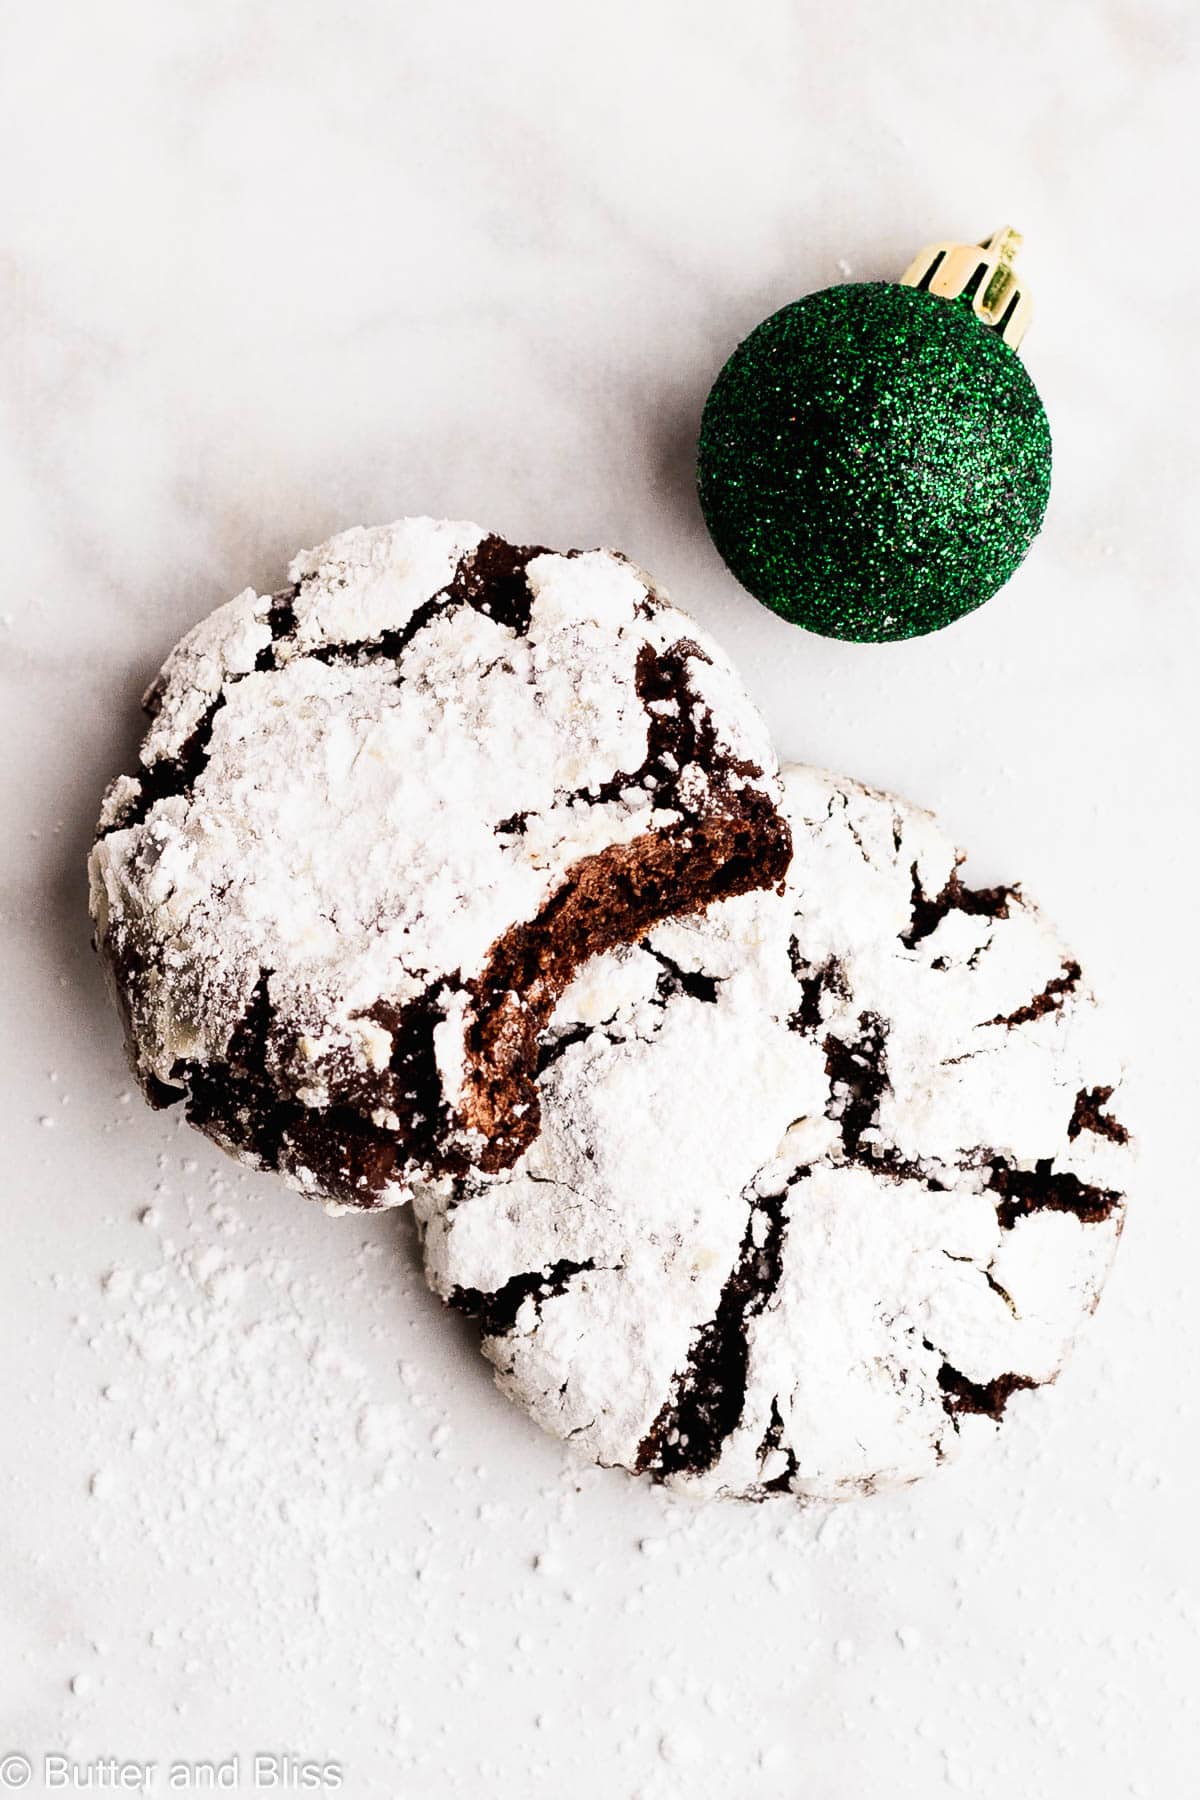 A stack of two festive chocolate crinkle cookies next to a pretty green ornament.